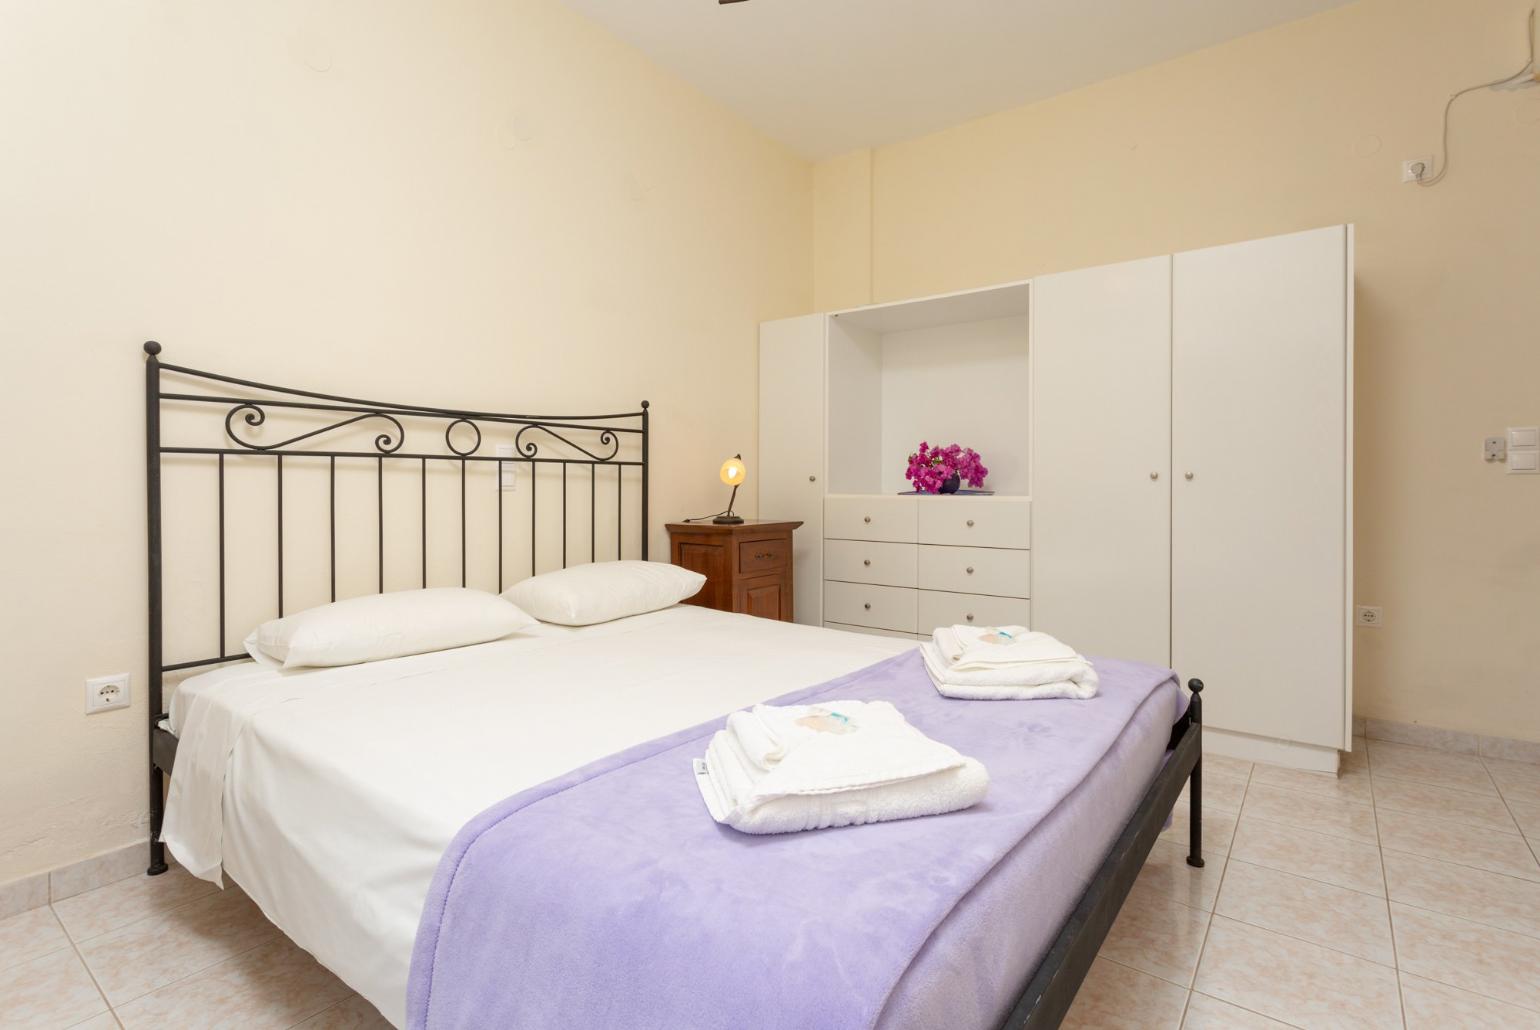 Double bedroom on ground floor with en suite bathroom, A/C, and terrace access